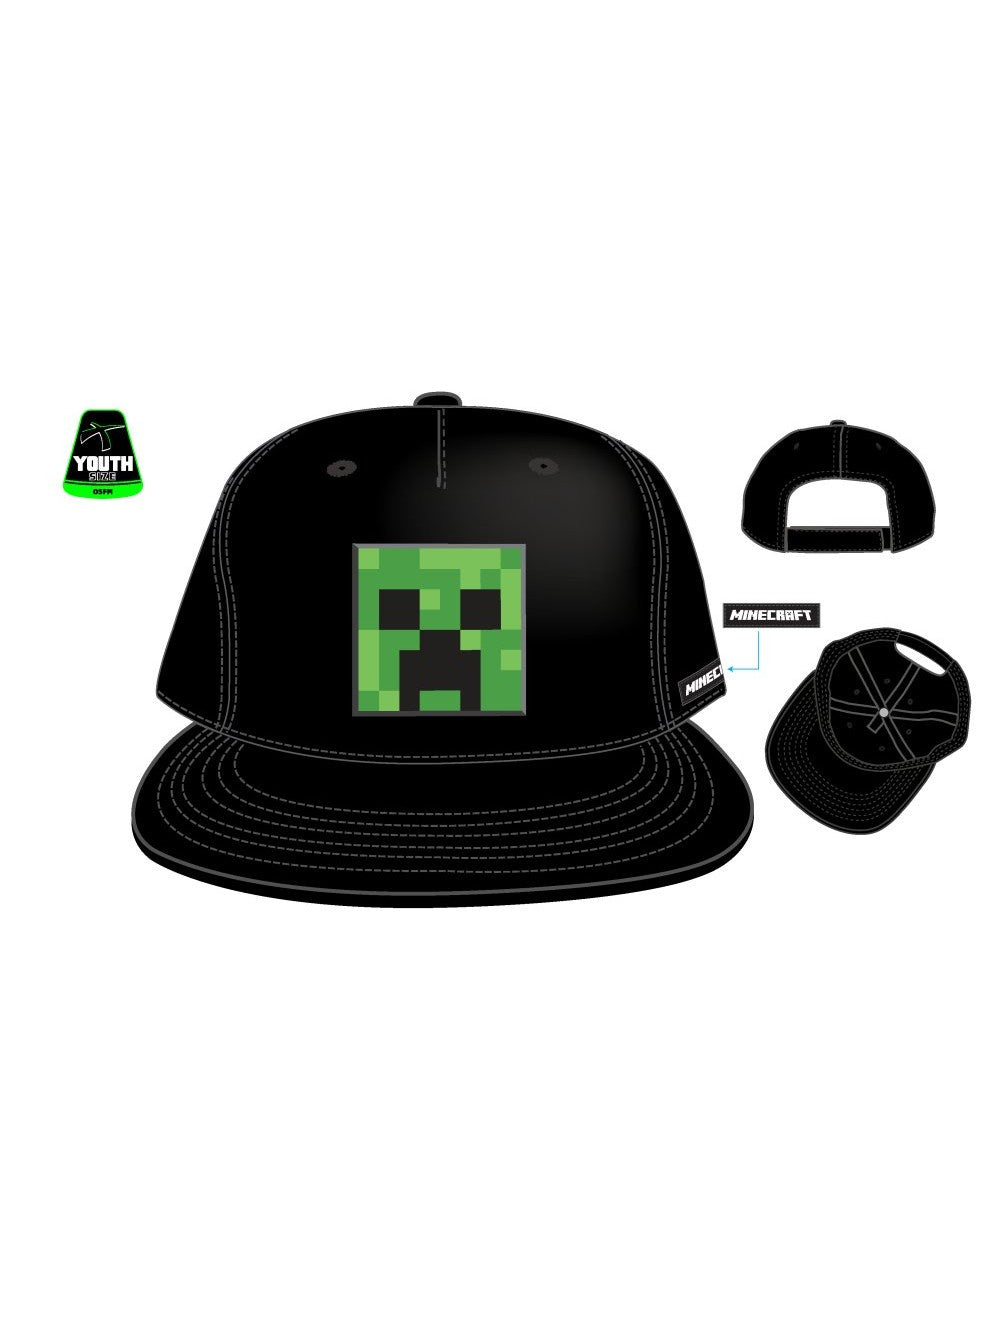 MINECRAFT - Creeper Embroidery Cotton Twill Youth